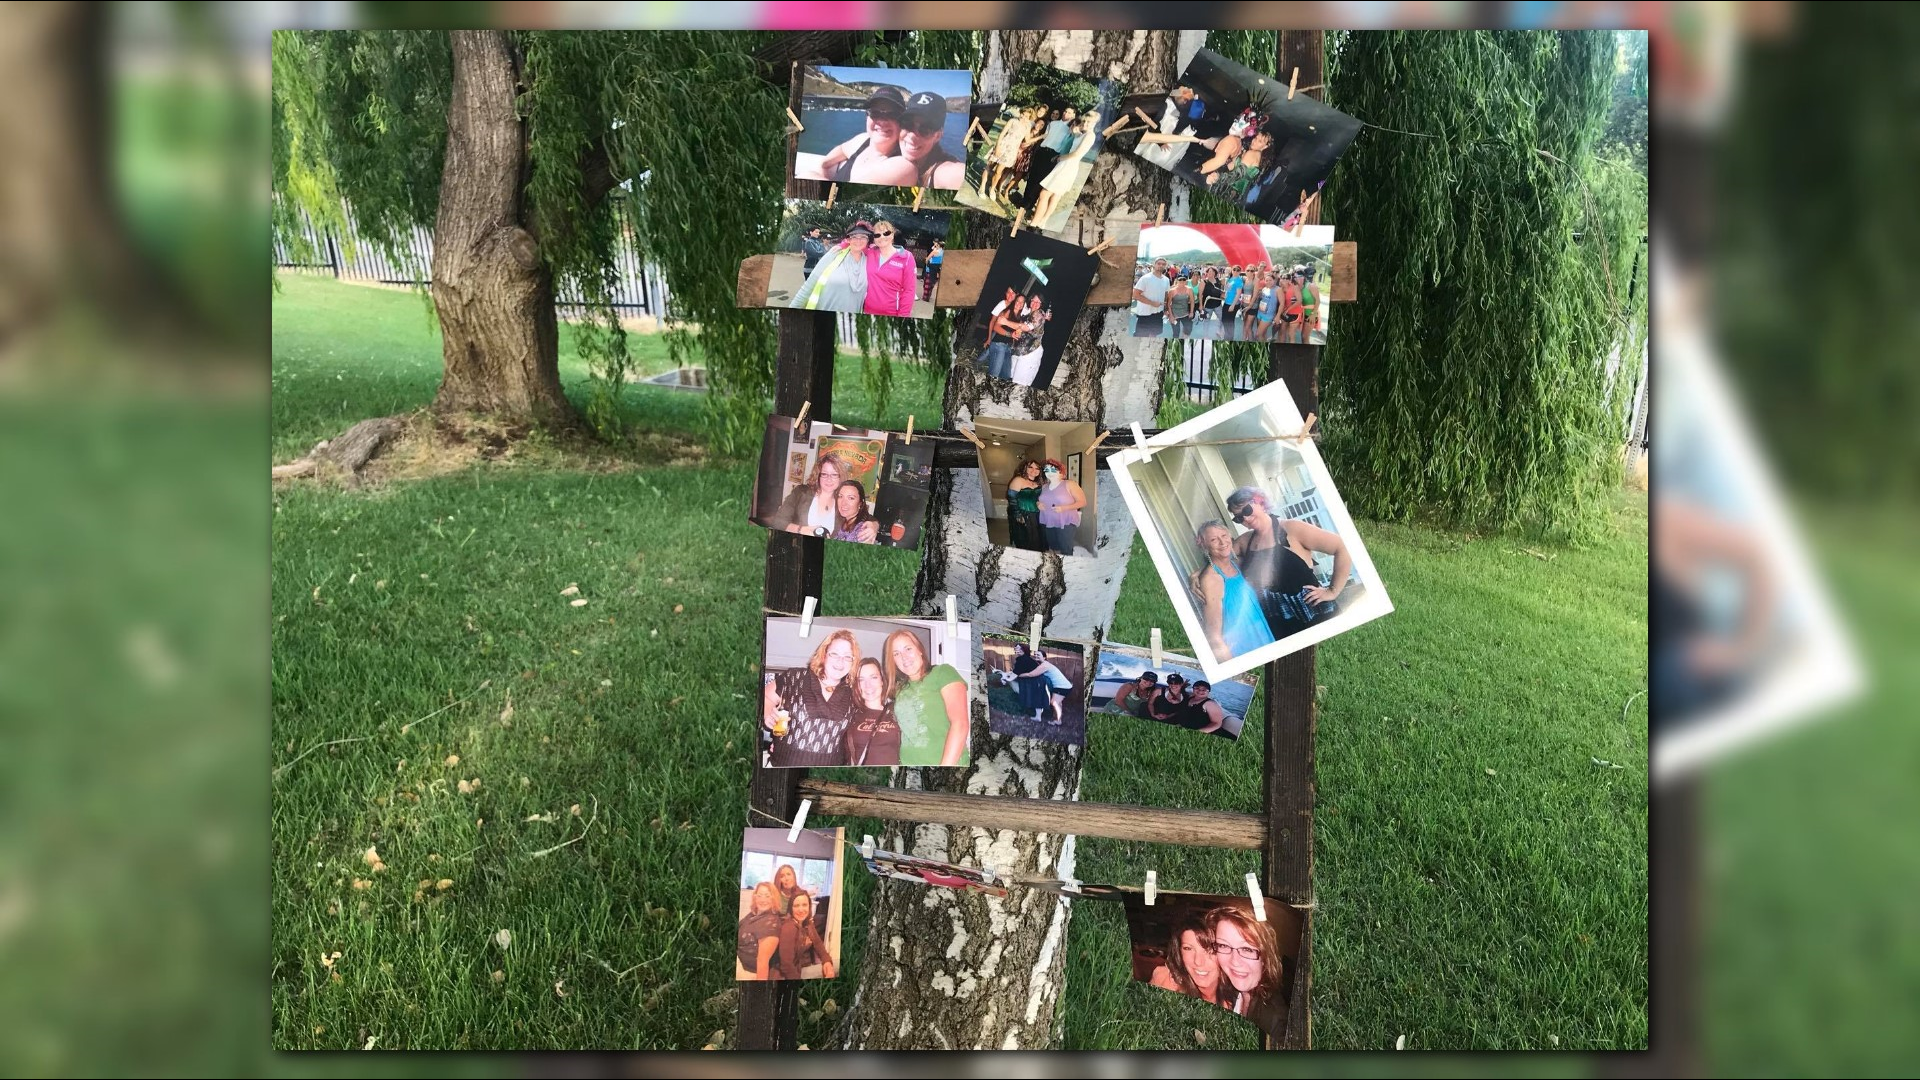 Friends and family are preparing for a Celebration of Life to remember Aimee Eddington-Crawford, a 40-year-old Oakdale mother of three who was found dead in her home on May 1.